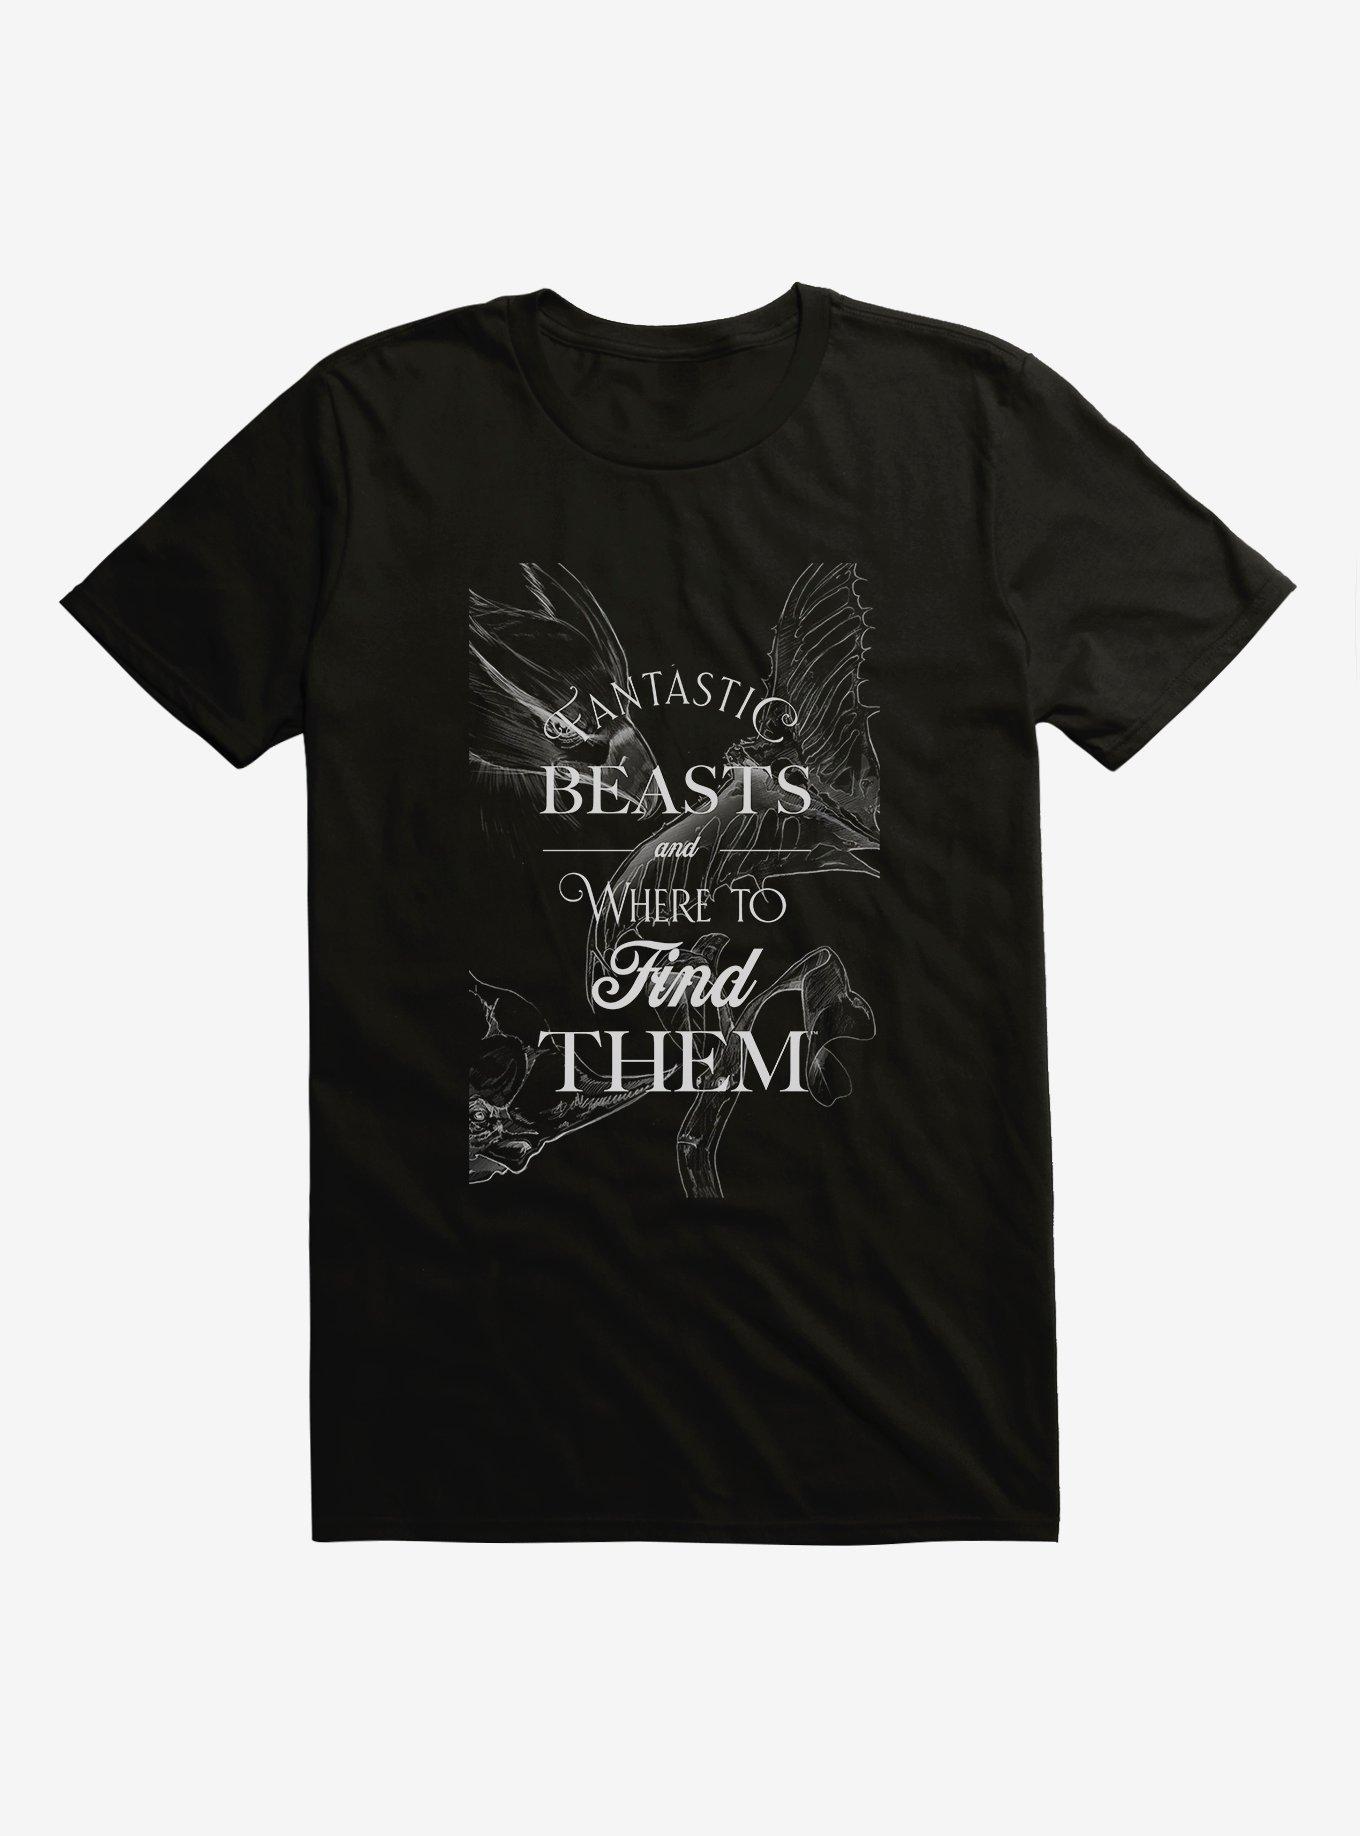 Fantastic Beasts And Where To Find Them T-Shirt, BLACK, hi-res